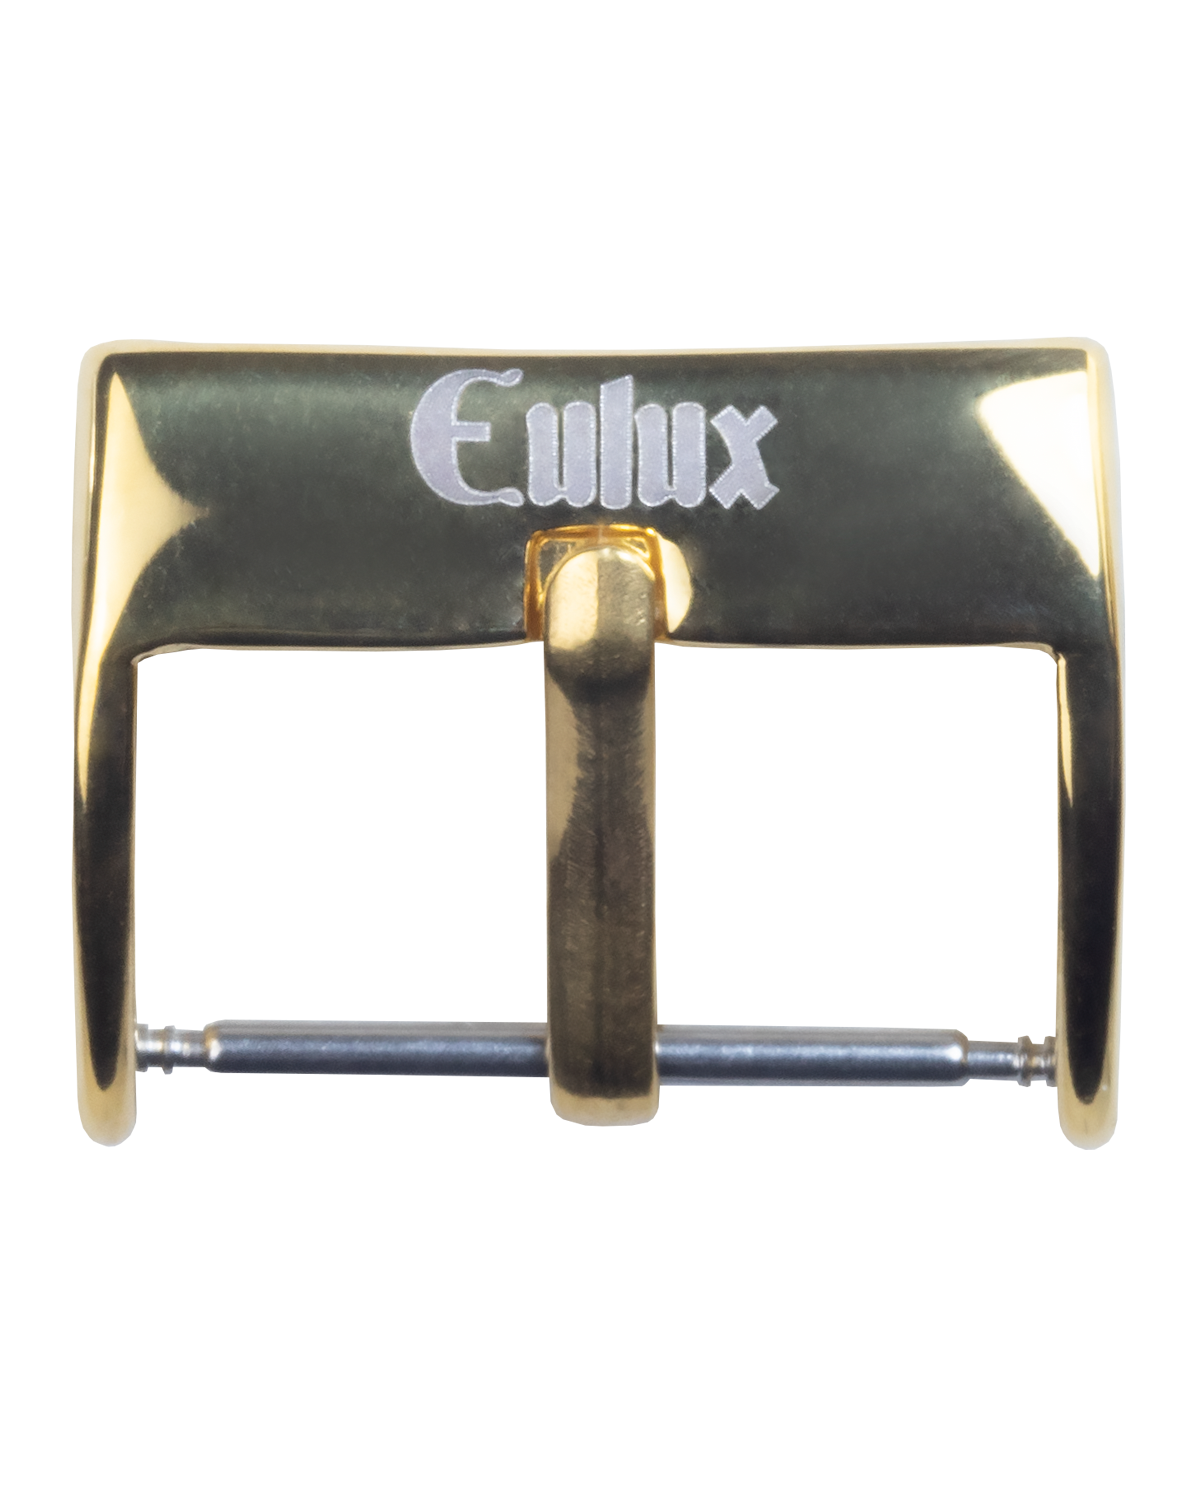 EULUX pin buckle, gold plated